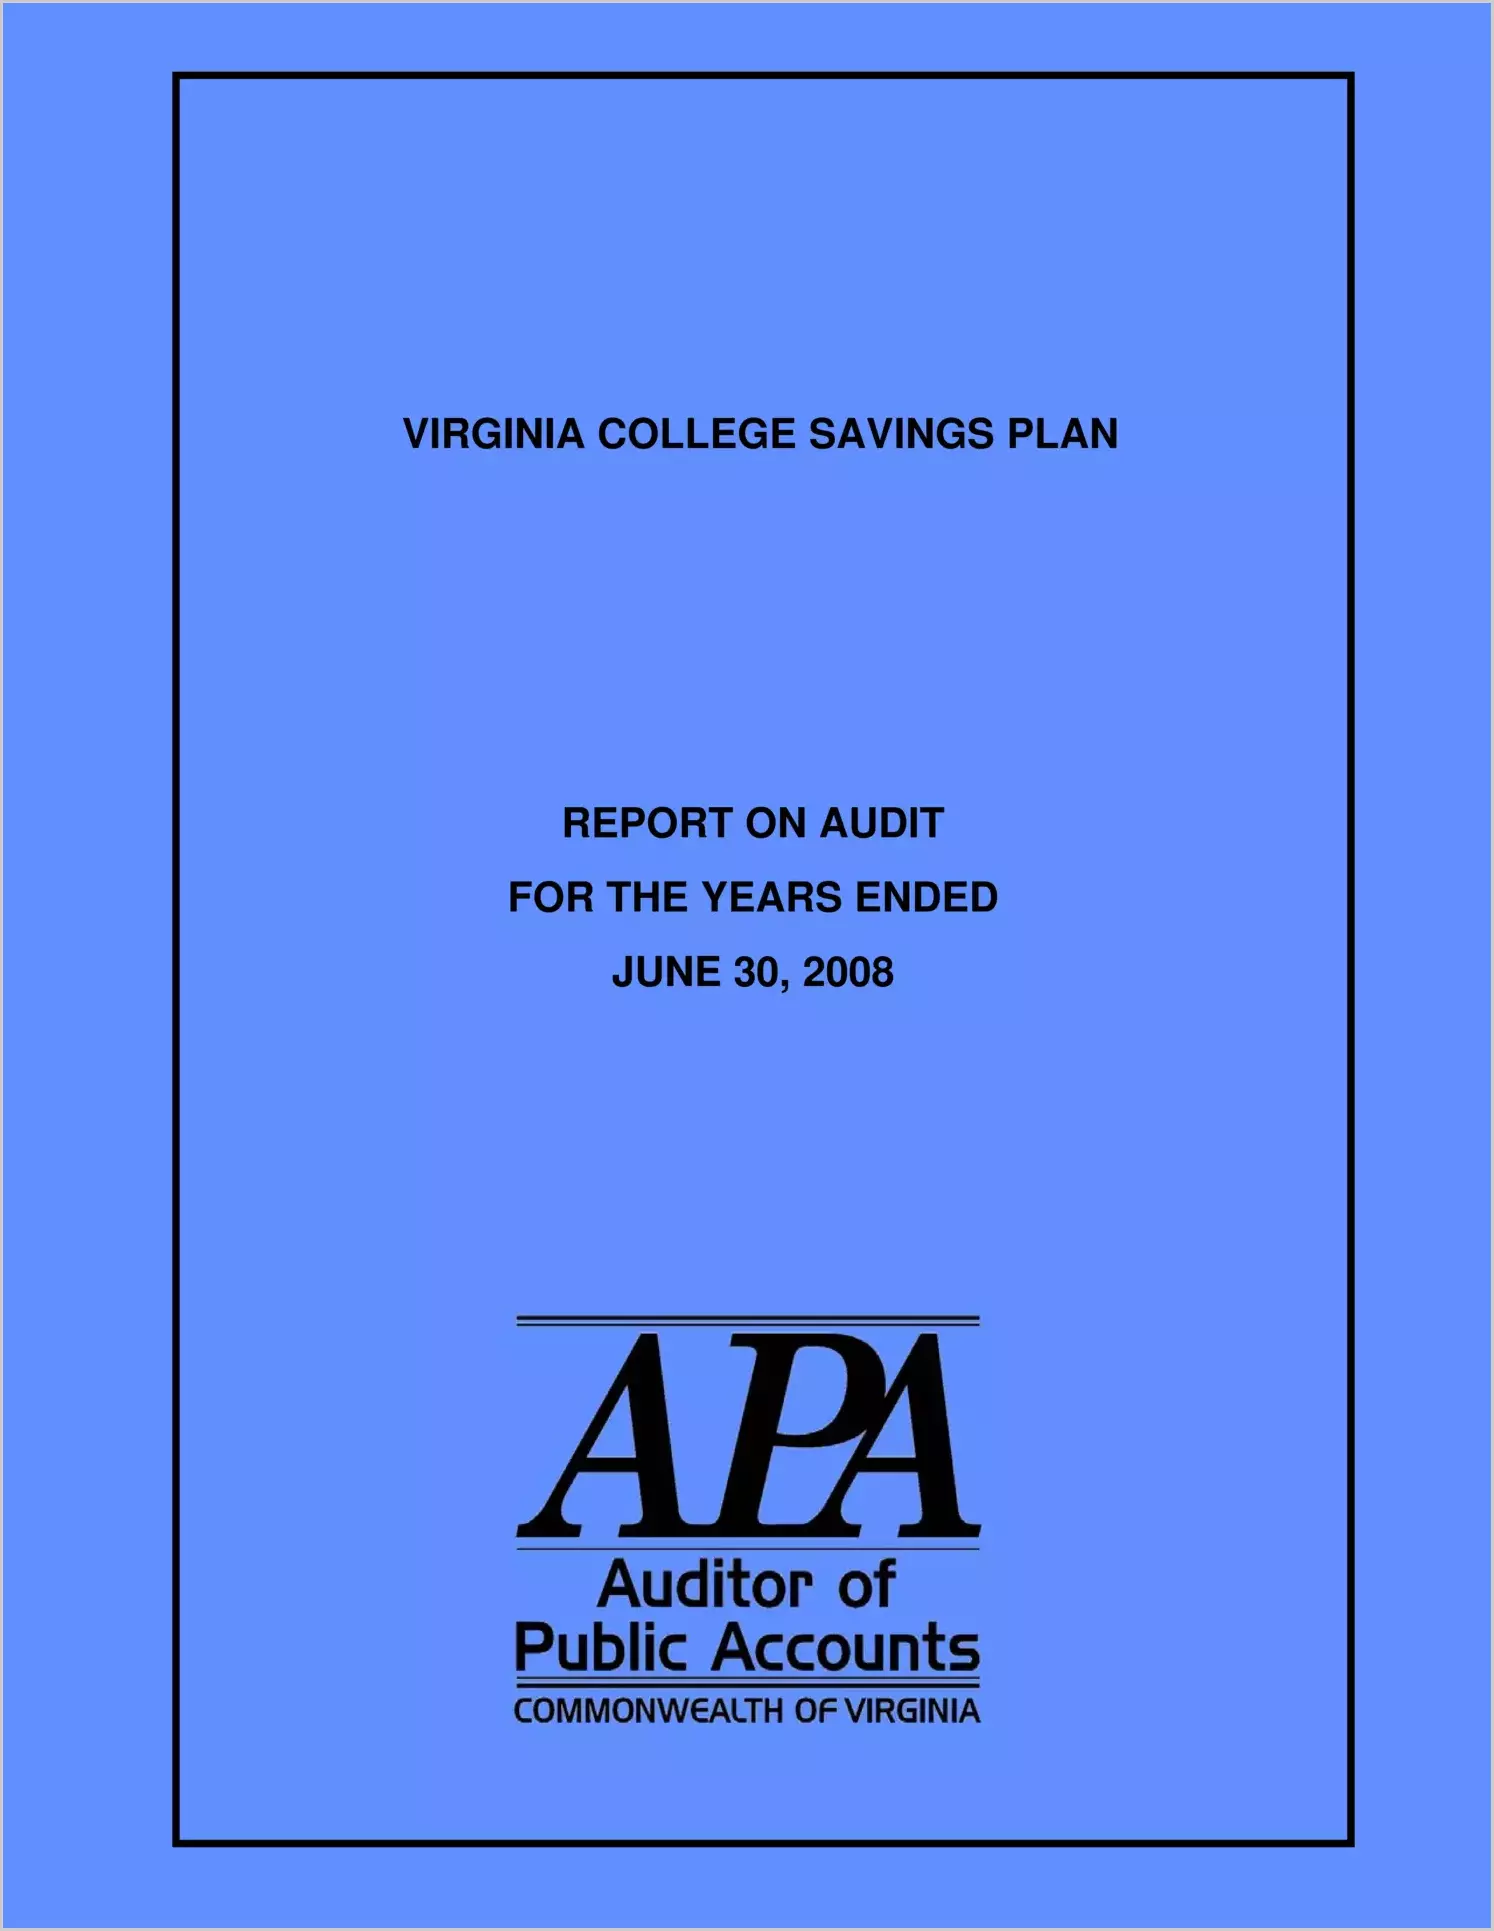 Virginia College Savings Plan for the year ended June 30, 2008